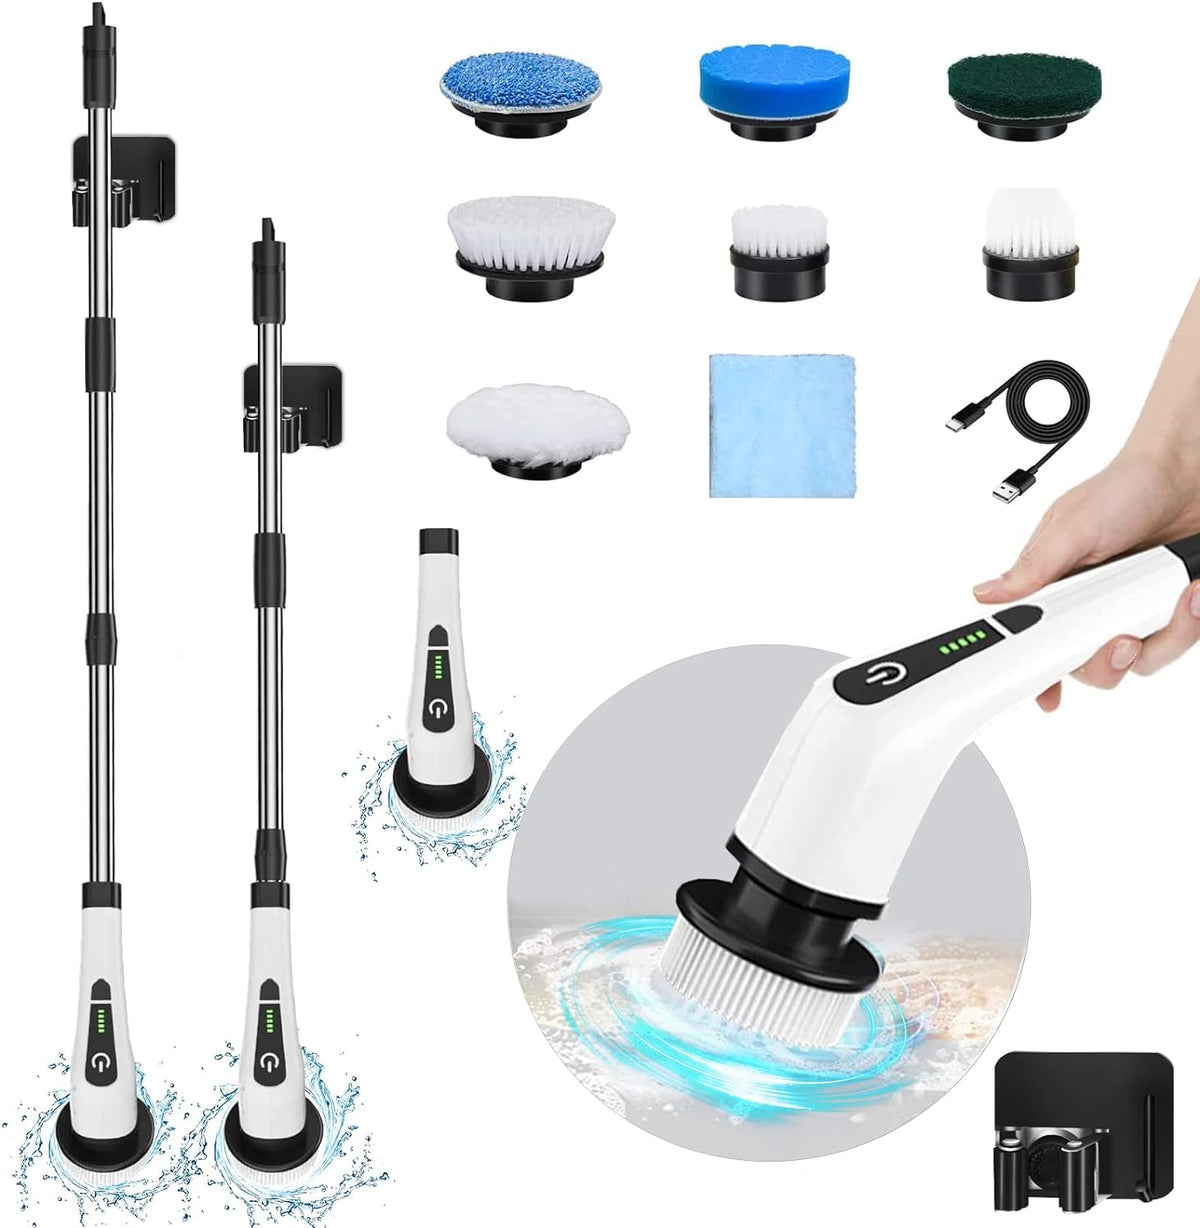 9 In 1 Electric Cleaning Device - Brush Heads & Adjustable Extension Arm | Power Cleaning for Bathroom, Kitchen, Floor, Tile, Tub